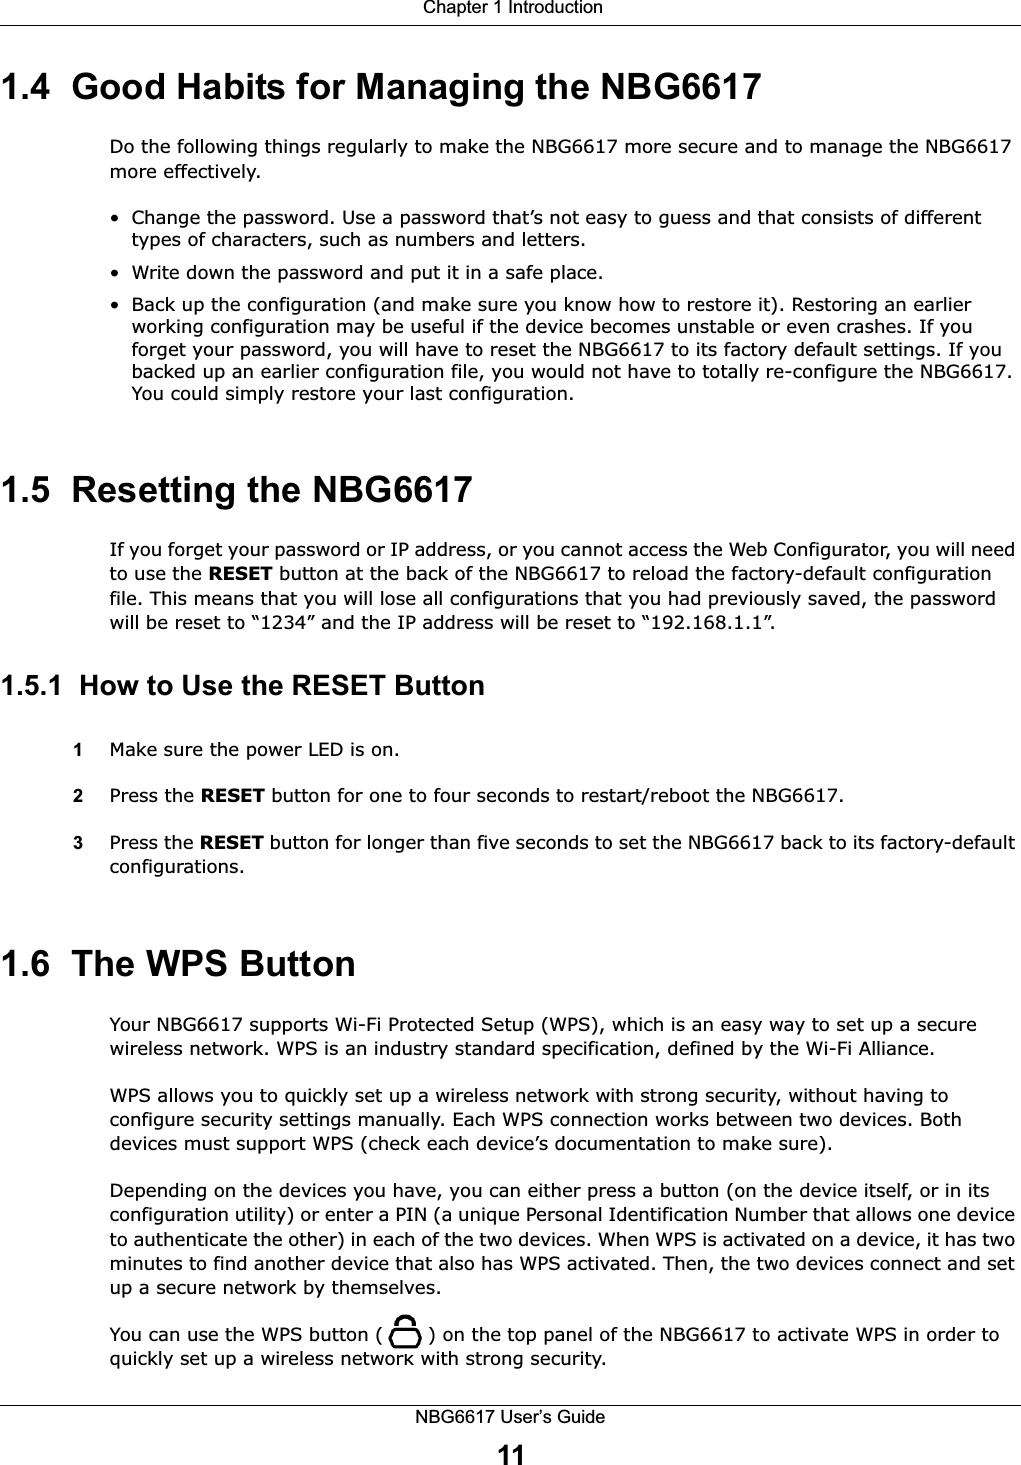  Chapter 1 IntroductionNBG6617 User’s Guide111.4  Good Habits for Managing the NBG6617Do the following things regularly to make the NBG6617 more secure and to manage the NBG6617 more effectively.• Change the password. Use a password that’s not easy to guess and that consists of different types of characters, such as numbers and letters.• Write down the password and put it in a safe place.• Back up the configuration (and make sure you know how to restore it). Restoring an earlier working configuration may be useful if the device becomes unstable or even crashes. If you forget your password, you will have to reset the NBG6617 to its factory default settings. If you backed up an earlier configuration file, you would not have to totally re-configure the NBG6617. You could simply restore your last configuration.1.5  Resetting the NBG6617If you forget your password or IP address, or you cannot access the Web Configurator, you will need to use the RESET button at the back of the NBG6617 to reload the factory-default configuration file. This means that you will lose all configurations that you had previously saved, the password will be reset to “1234” and the IP address will be reset to “192.168.1.1”.1.5.1  How to Use the RESET Button1Make sure the power LED is on.2Press the RESET button for one to four seconds to restart/reboot the NBG6617.3Press the RESET button for longer than five seconds to set the NBG6617 back to its factory-default configurations.1.6  The WPS ButtonYour NBG6617 supports Wi-Fi Protected Setup (WPS), which is an easy way to set up a secure wireless network. WPS is an industry standard specification, defined by the Wi-Fi Alliance.WPS allows you to quickly set up a wireless network with strong security, without having to configure security settings manually. Each WPS connection works between two devices. Both devices must support WPS (check each device’s documentation to make sure). Depending on the devices you have, you can either press a button (on the device itself, or in its configuration utility) or enter a PIN (a unique Personal Identification Number that allows one device to authenticate the other) in each of the two devices. When WPS is activated on a device, it has two minutes to find another device that also has WPS activated. Then, the two devices connect and set up a secure network by themselves.You can use the WPS button ( ) on the top panel of the NBG6617 to activate WPS in order to quickly set up a wireless network with strong security.